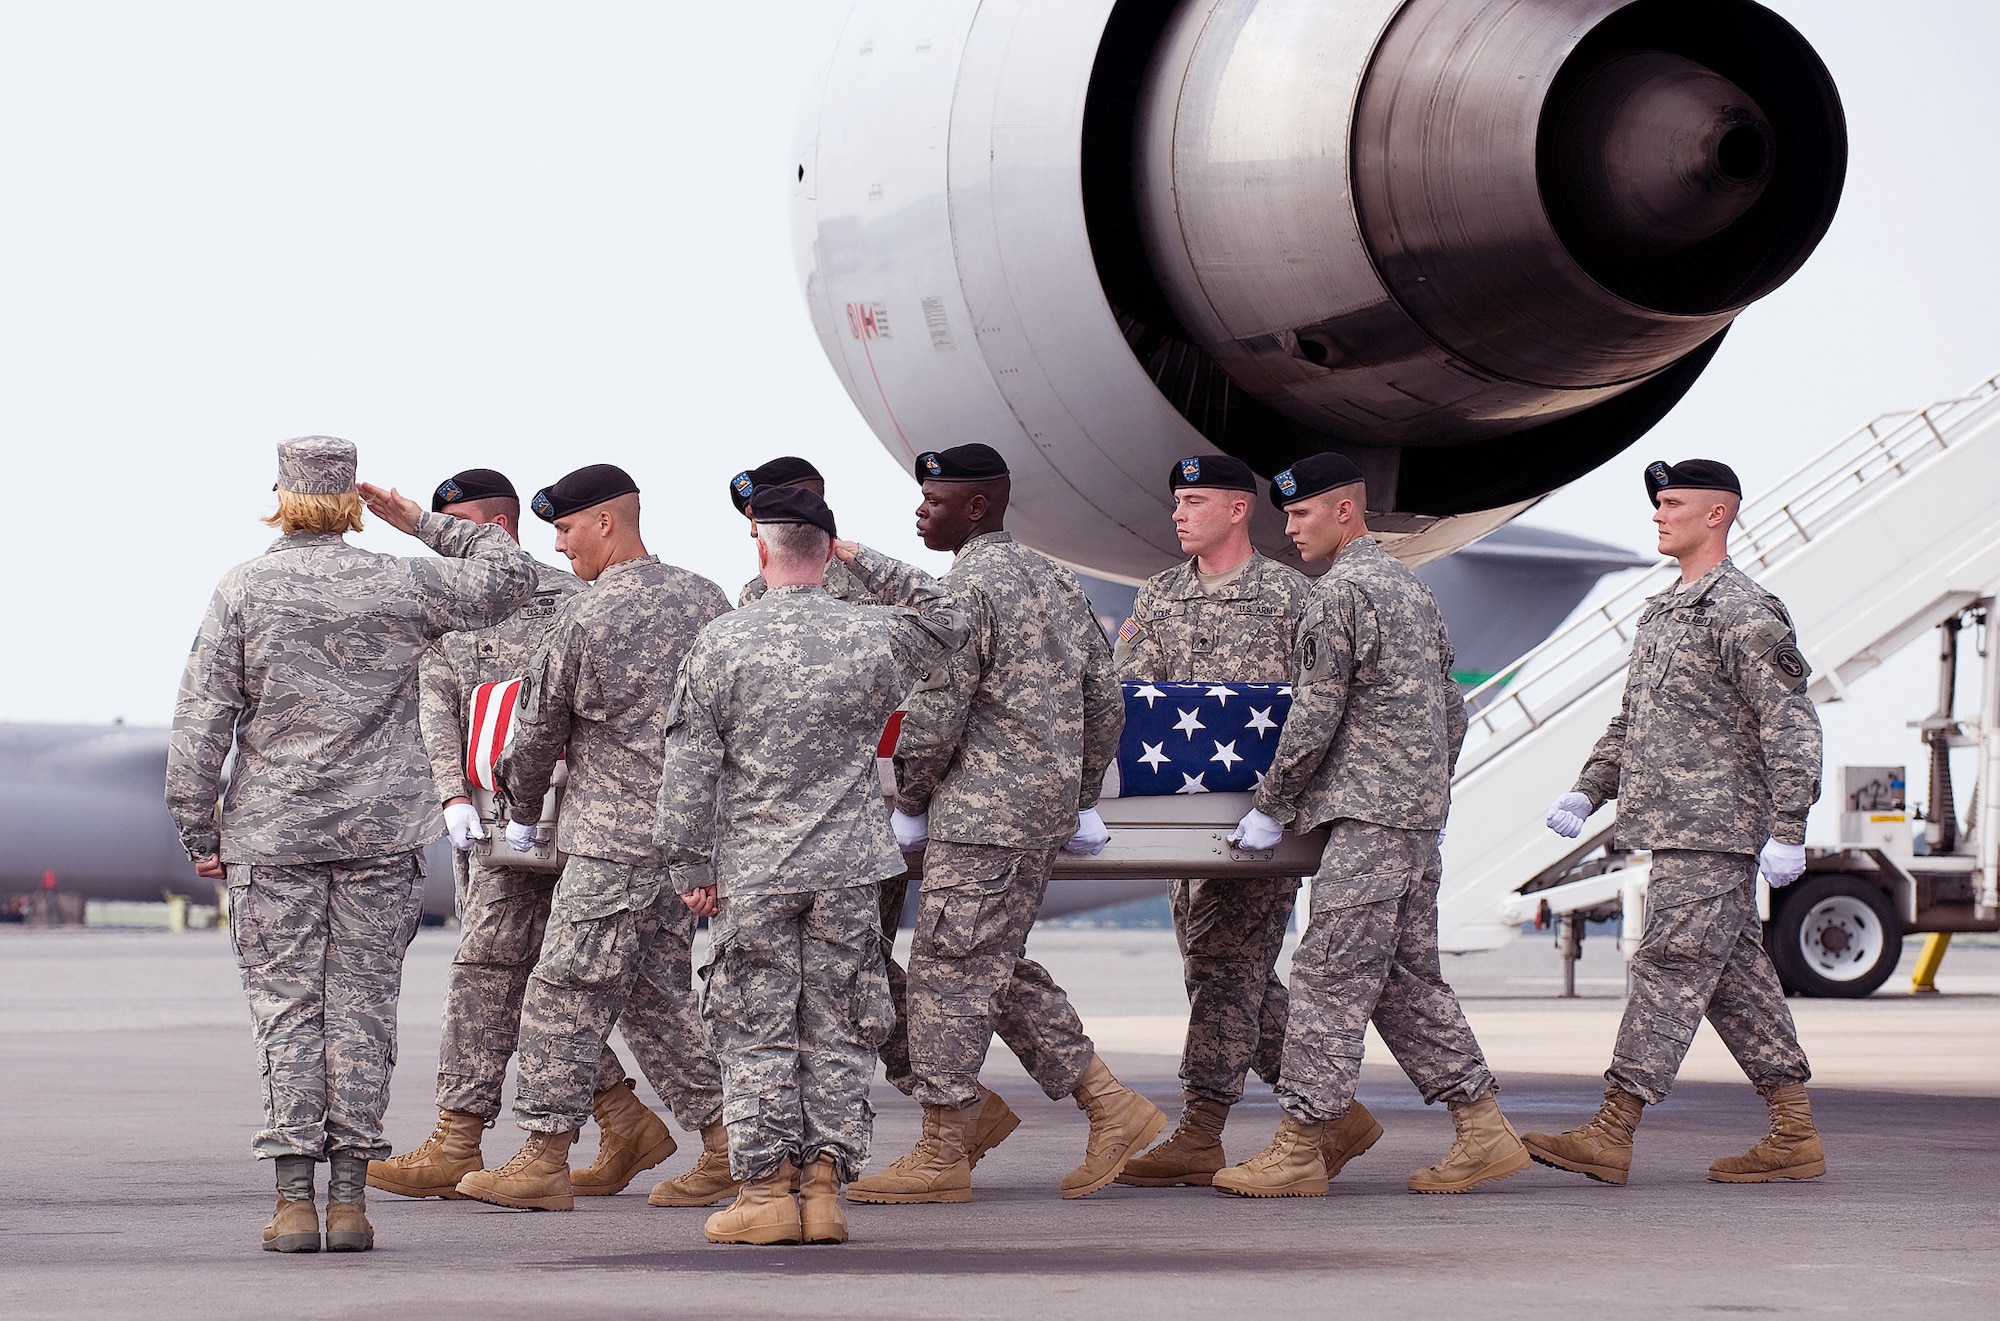 Col. Sharon Bannister and Army Maj. Gen. Merdith W. B. Temple salute as an Army carry team transfers the remains of Army Spc. Jamal M. Rhett Aug. 17, 2010, at Dover Air Force Base, Del. Colonel Bannister is one of nine colonels at Dover AFB who share the duty of calling the orders at dignified transfers honoring fallen servicemembers who return to U.S. soil. (U.S. Air Force photo/Jason Minto)